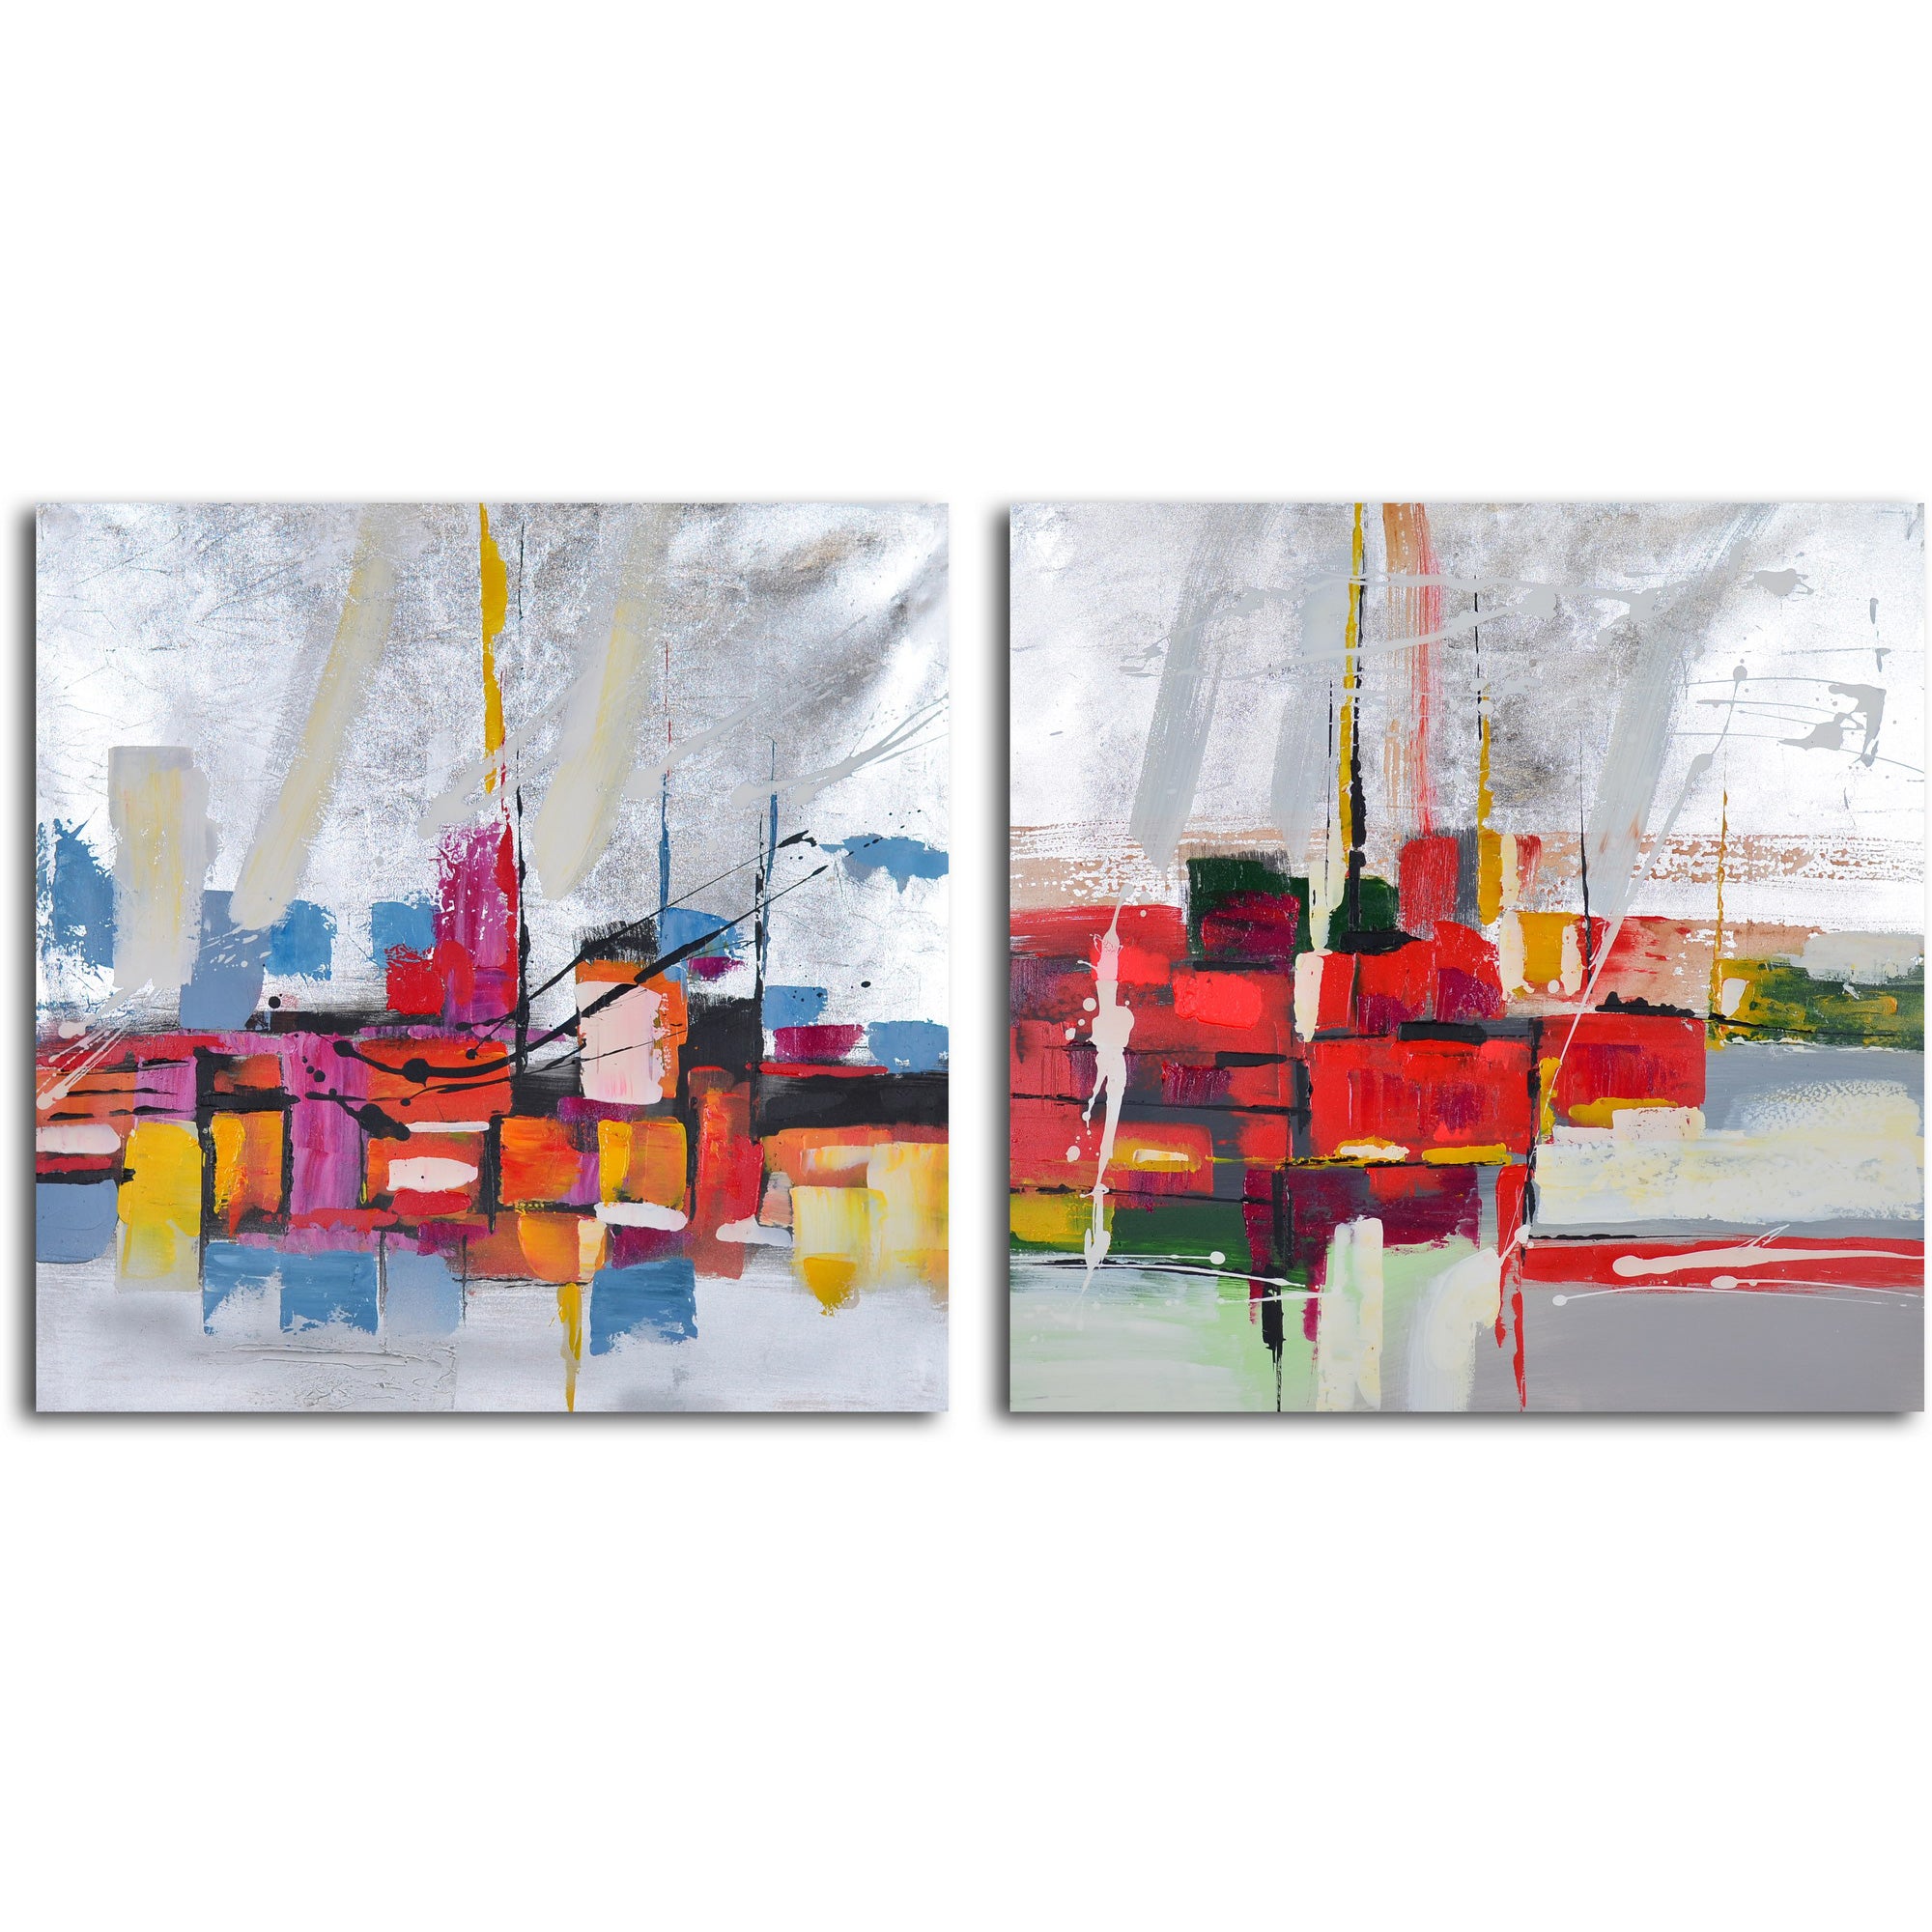 Hand Painted "Reflections by wharf abstract" 2 Piece Canvas Set